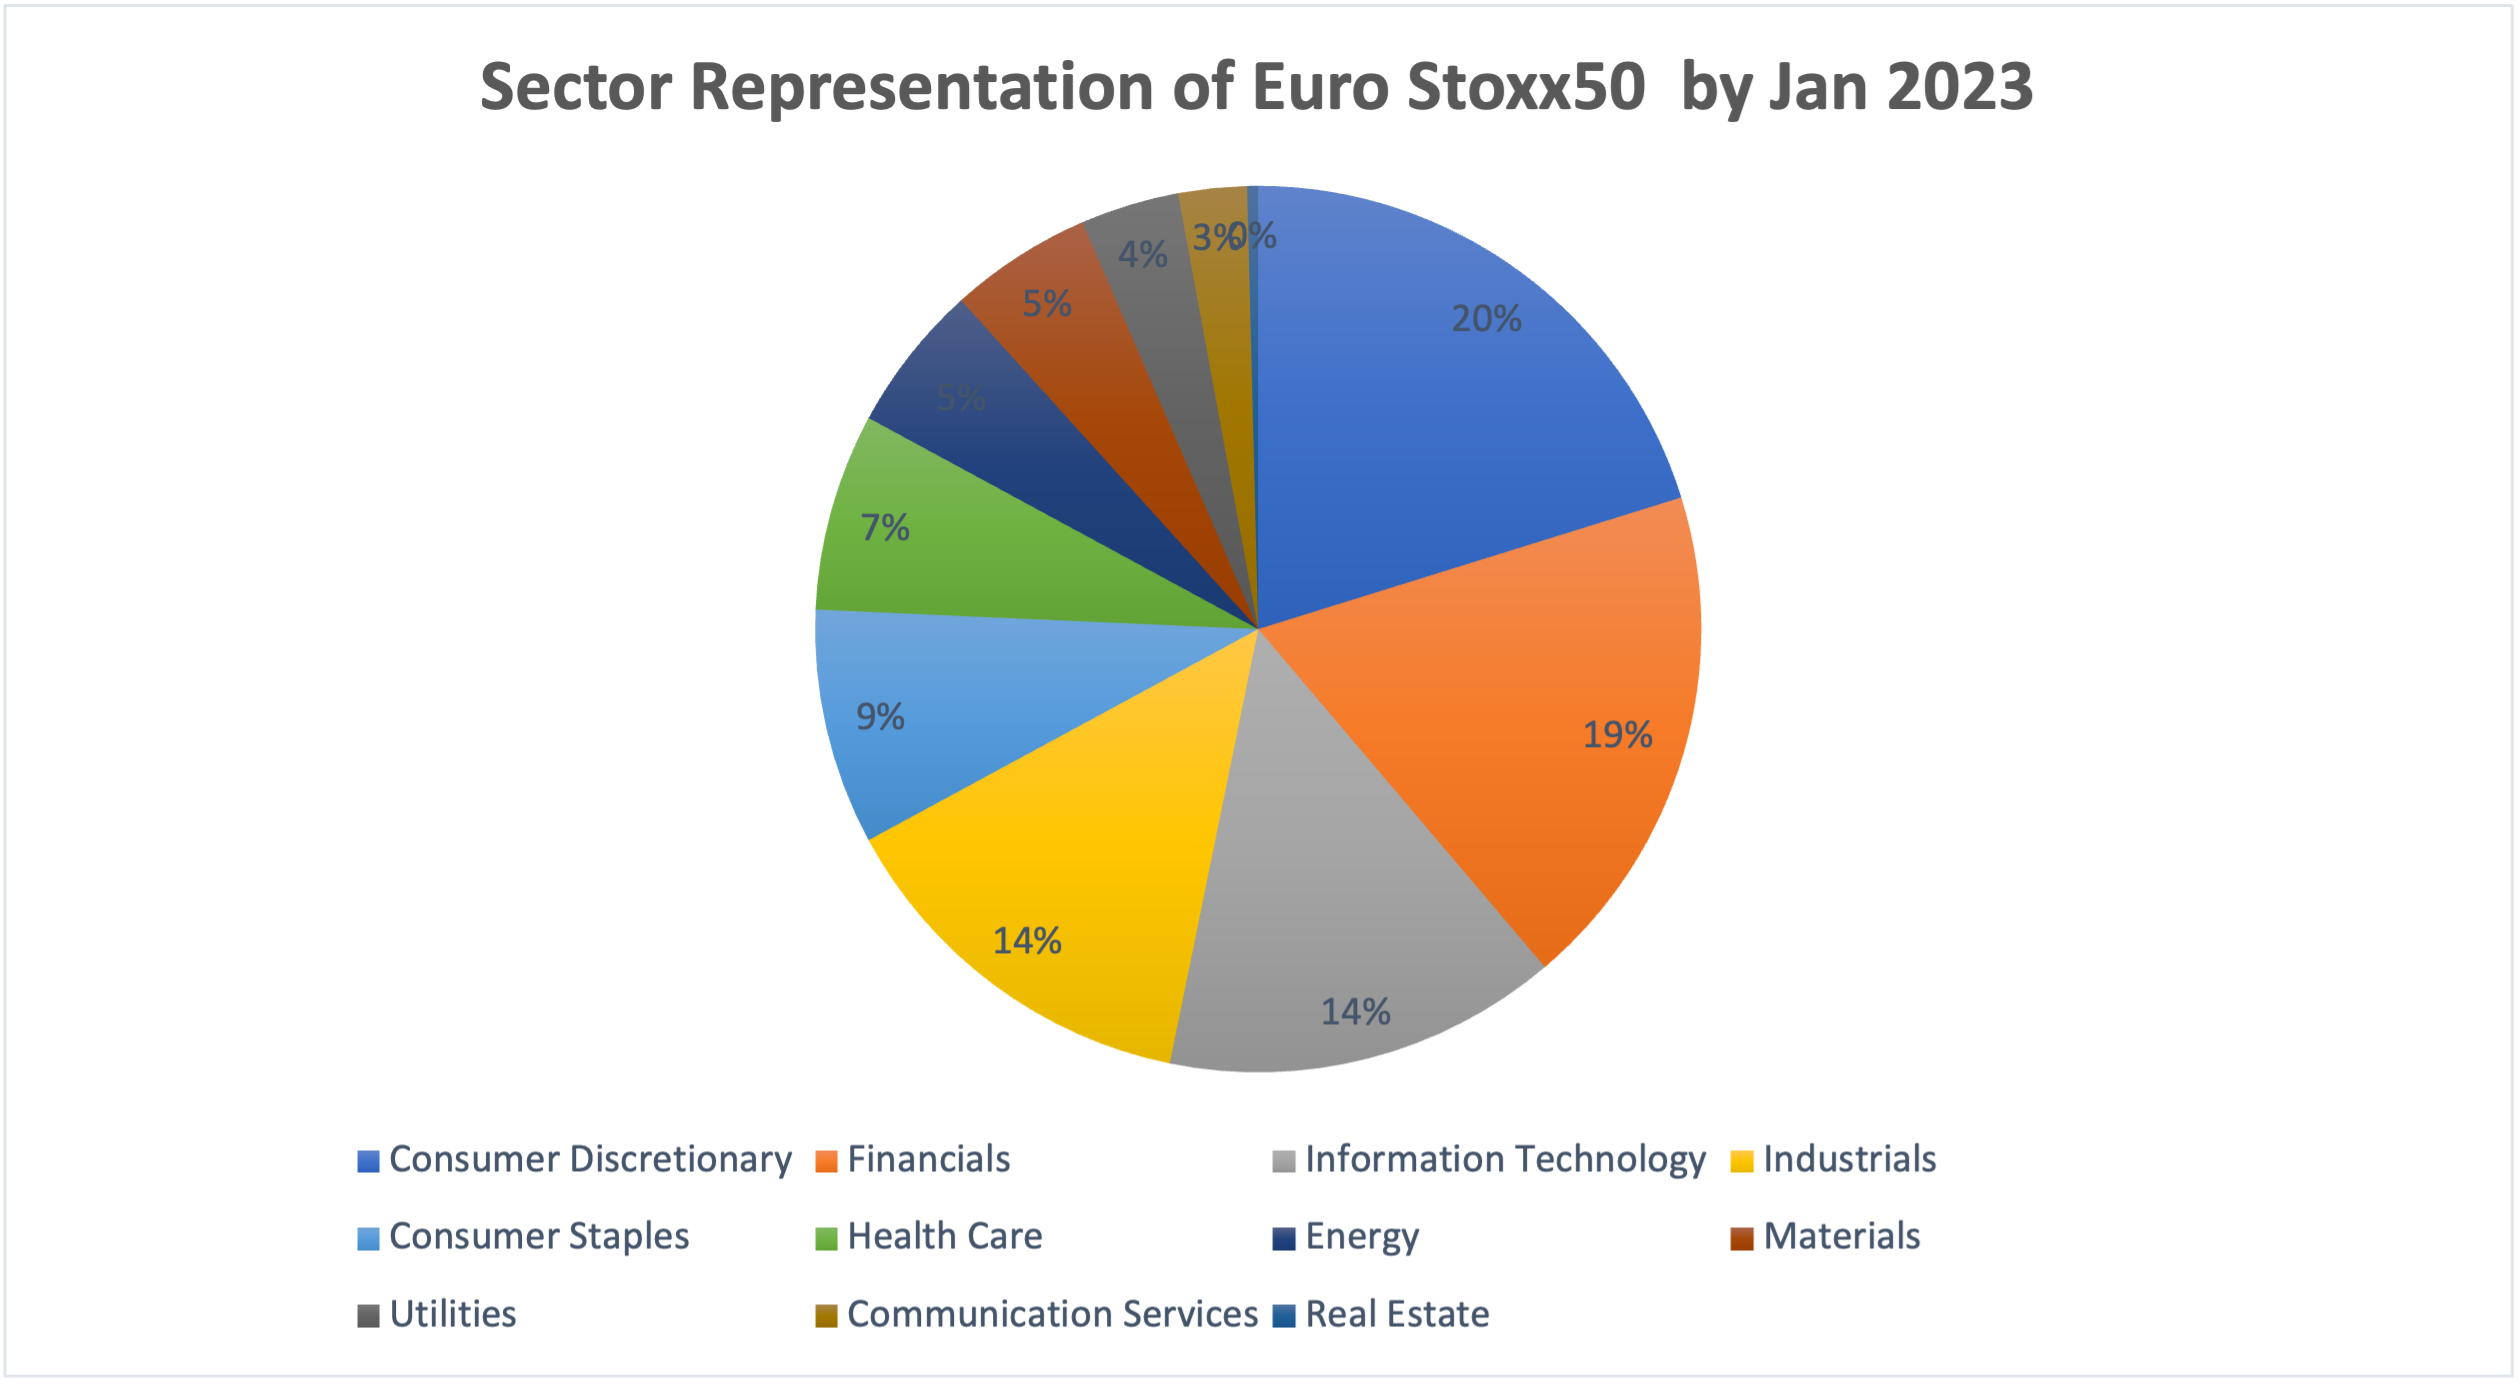 Sector representation in the Euro Stoxx 50 index